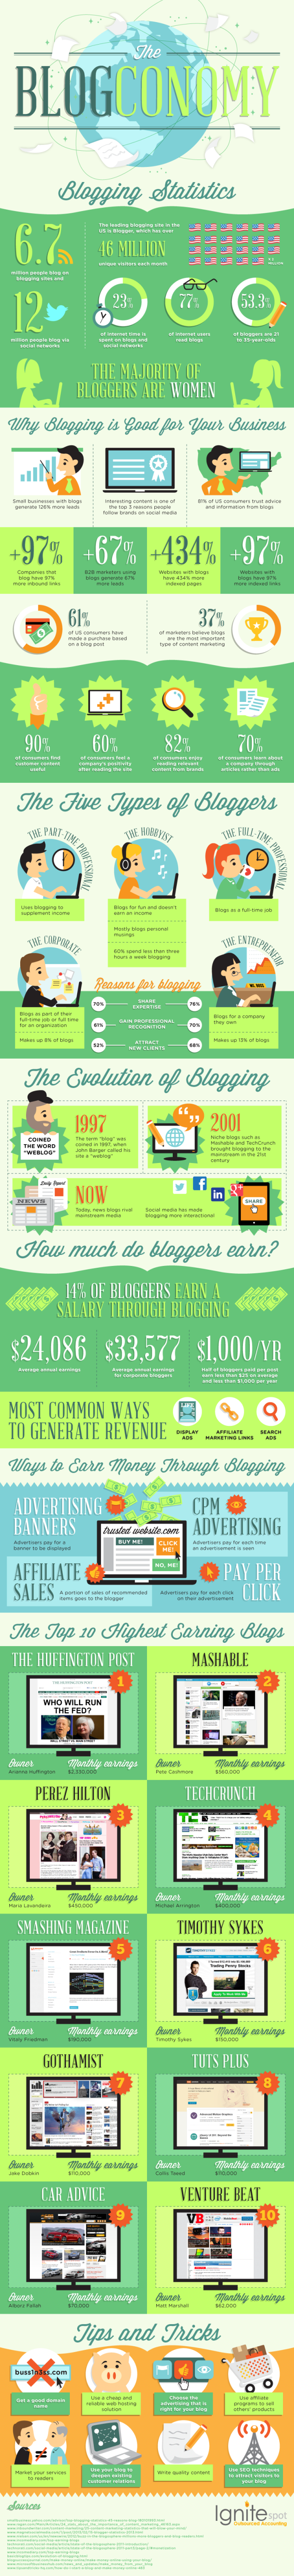 Why businesses should be blogging